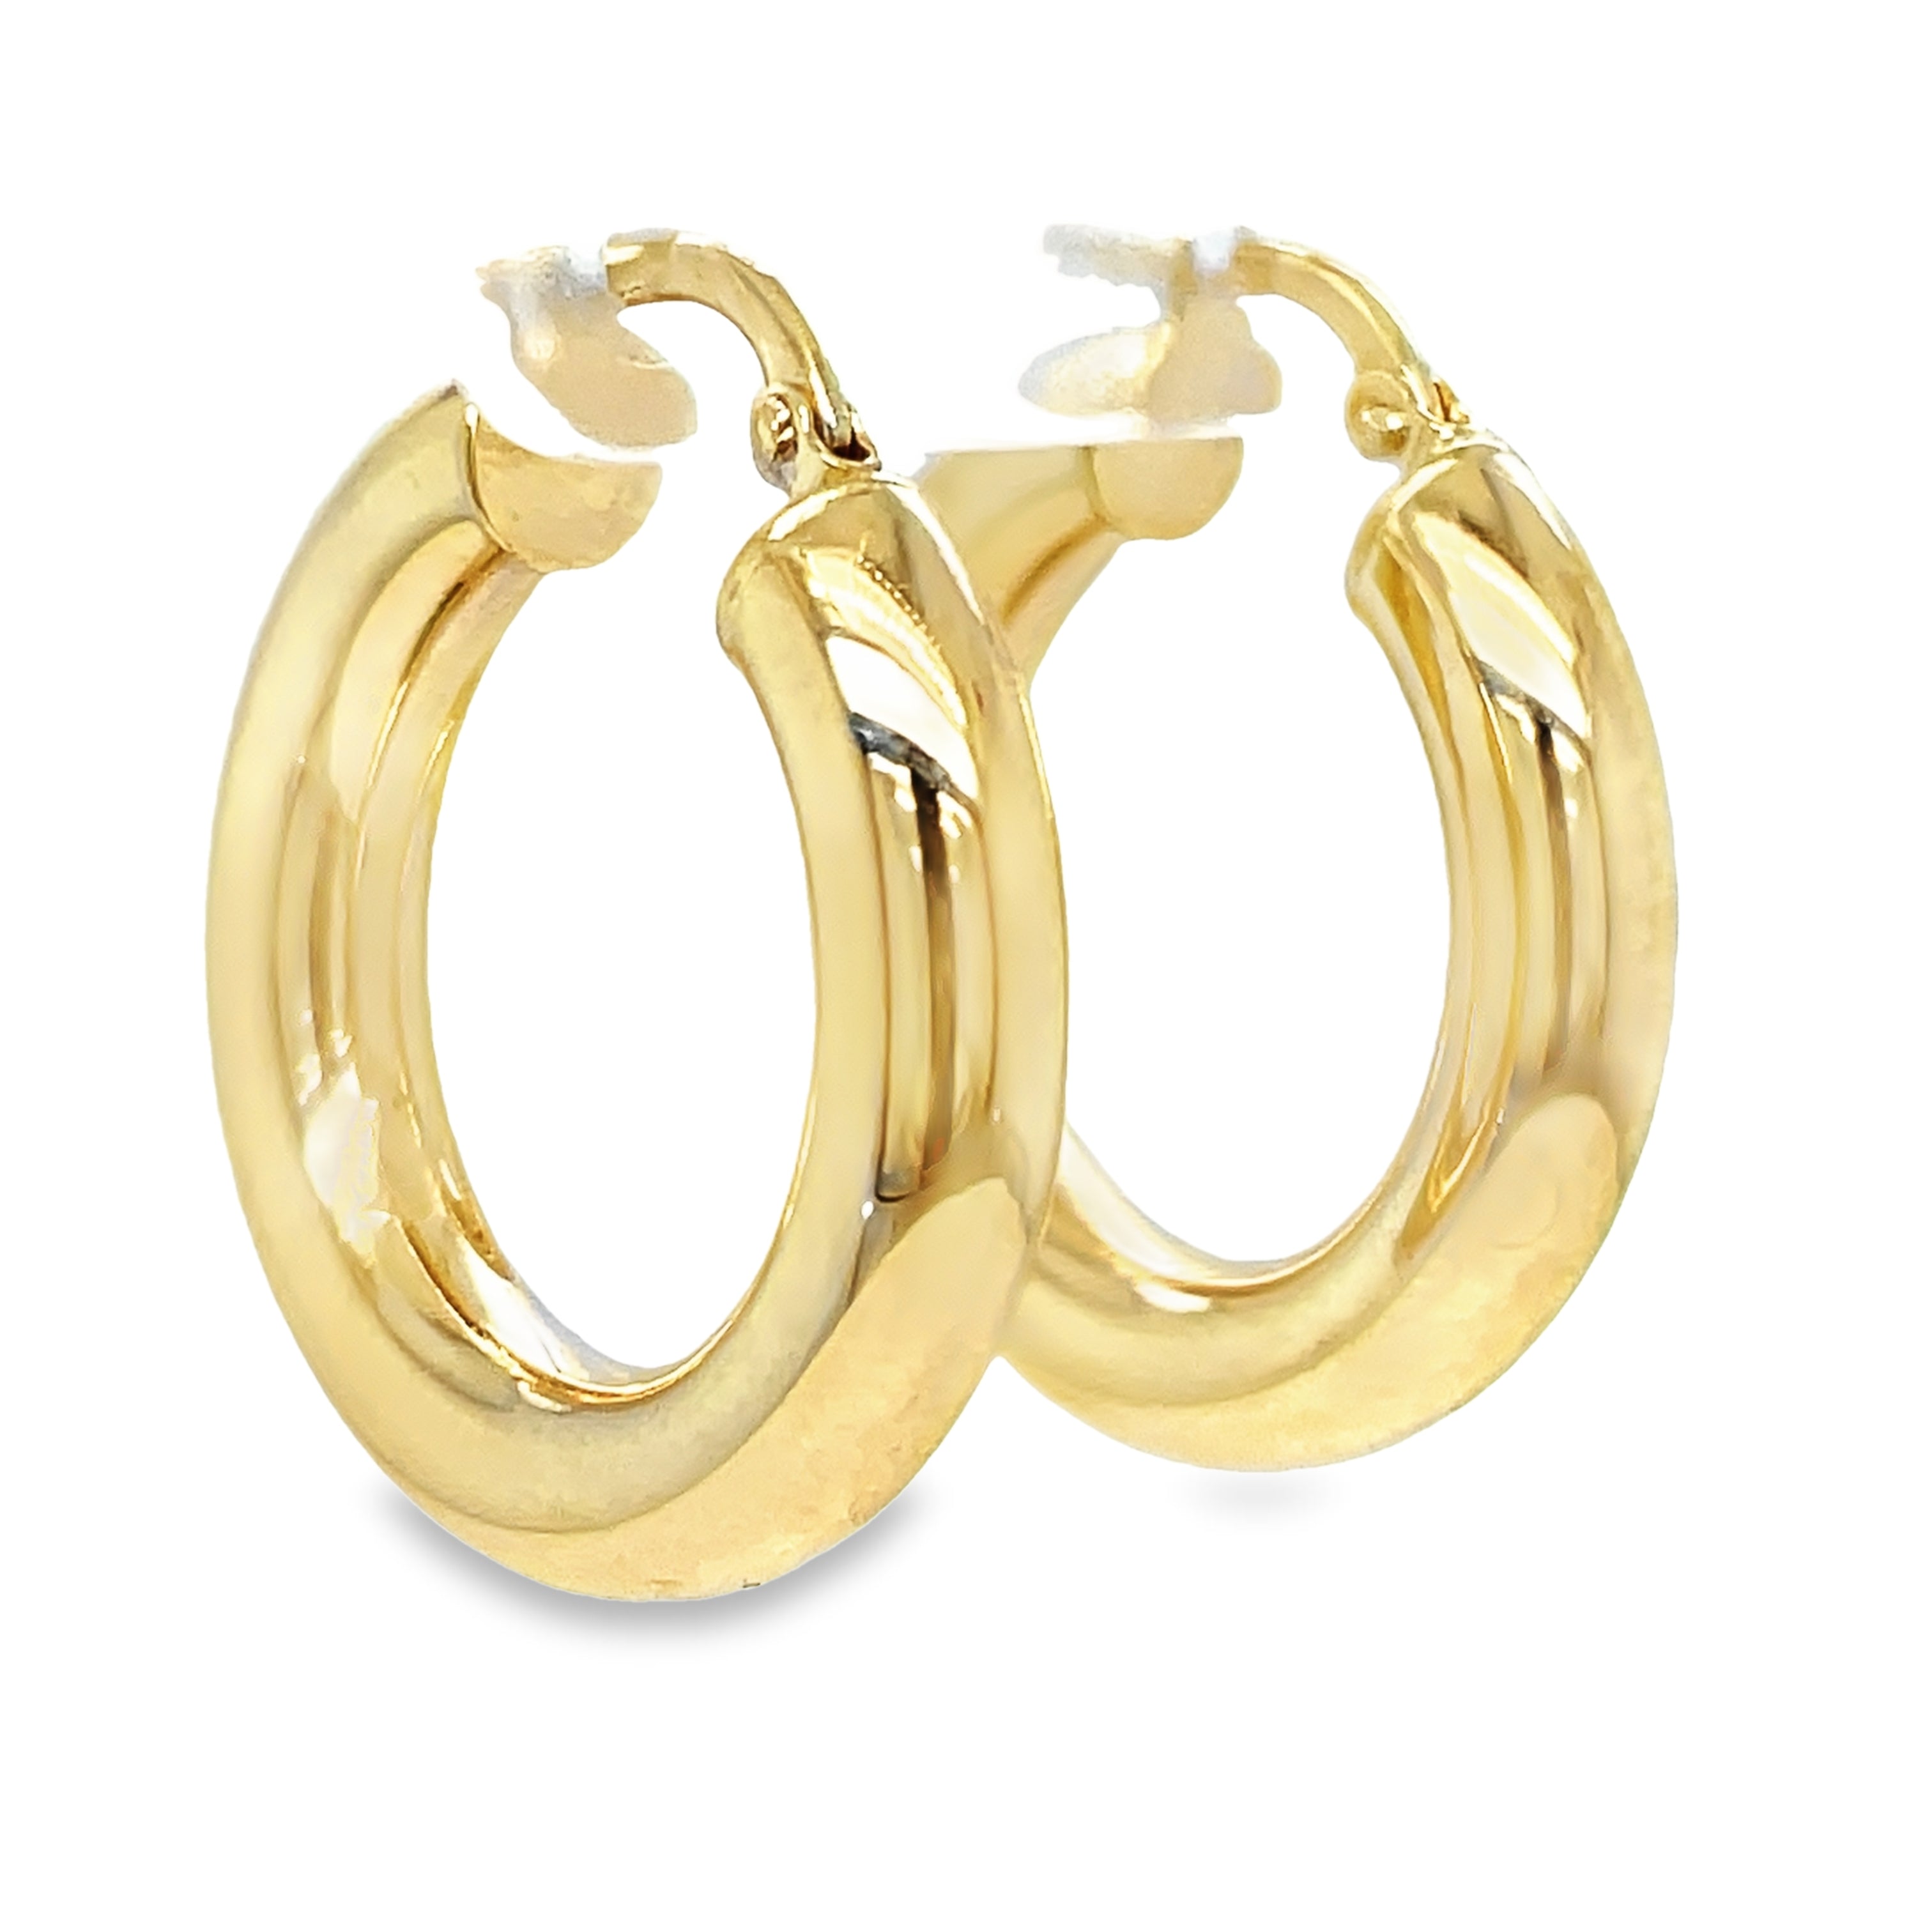 Experience elegance and style with our 14k Italian Yellow Gold Small Hoop Earrings! These beautiful earrings are crafted with 14k yellow gold and measure 4.80 mm thick. The secure lever system ensures they stay in place all day, making these 1" hoop earrings the perfect addition to any outfit. Elevate your look with these versatile and timeless earrings.